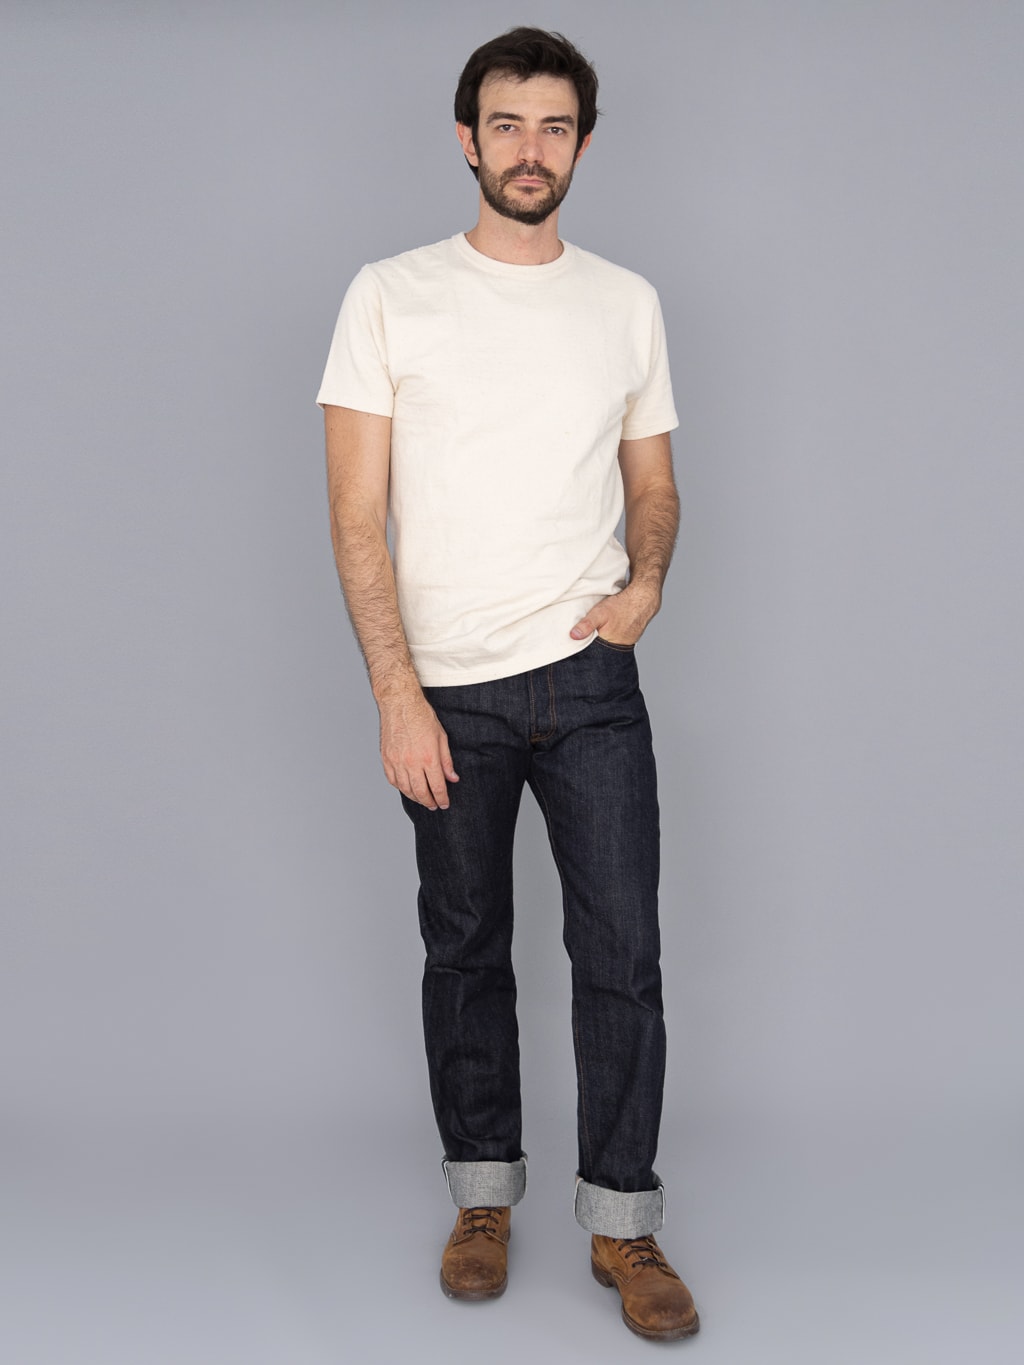 The Flat Head 3009 14.5oz straight tapered Jeans fit